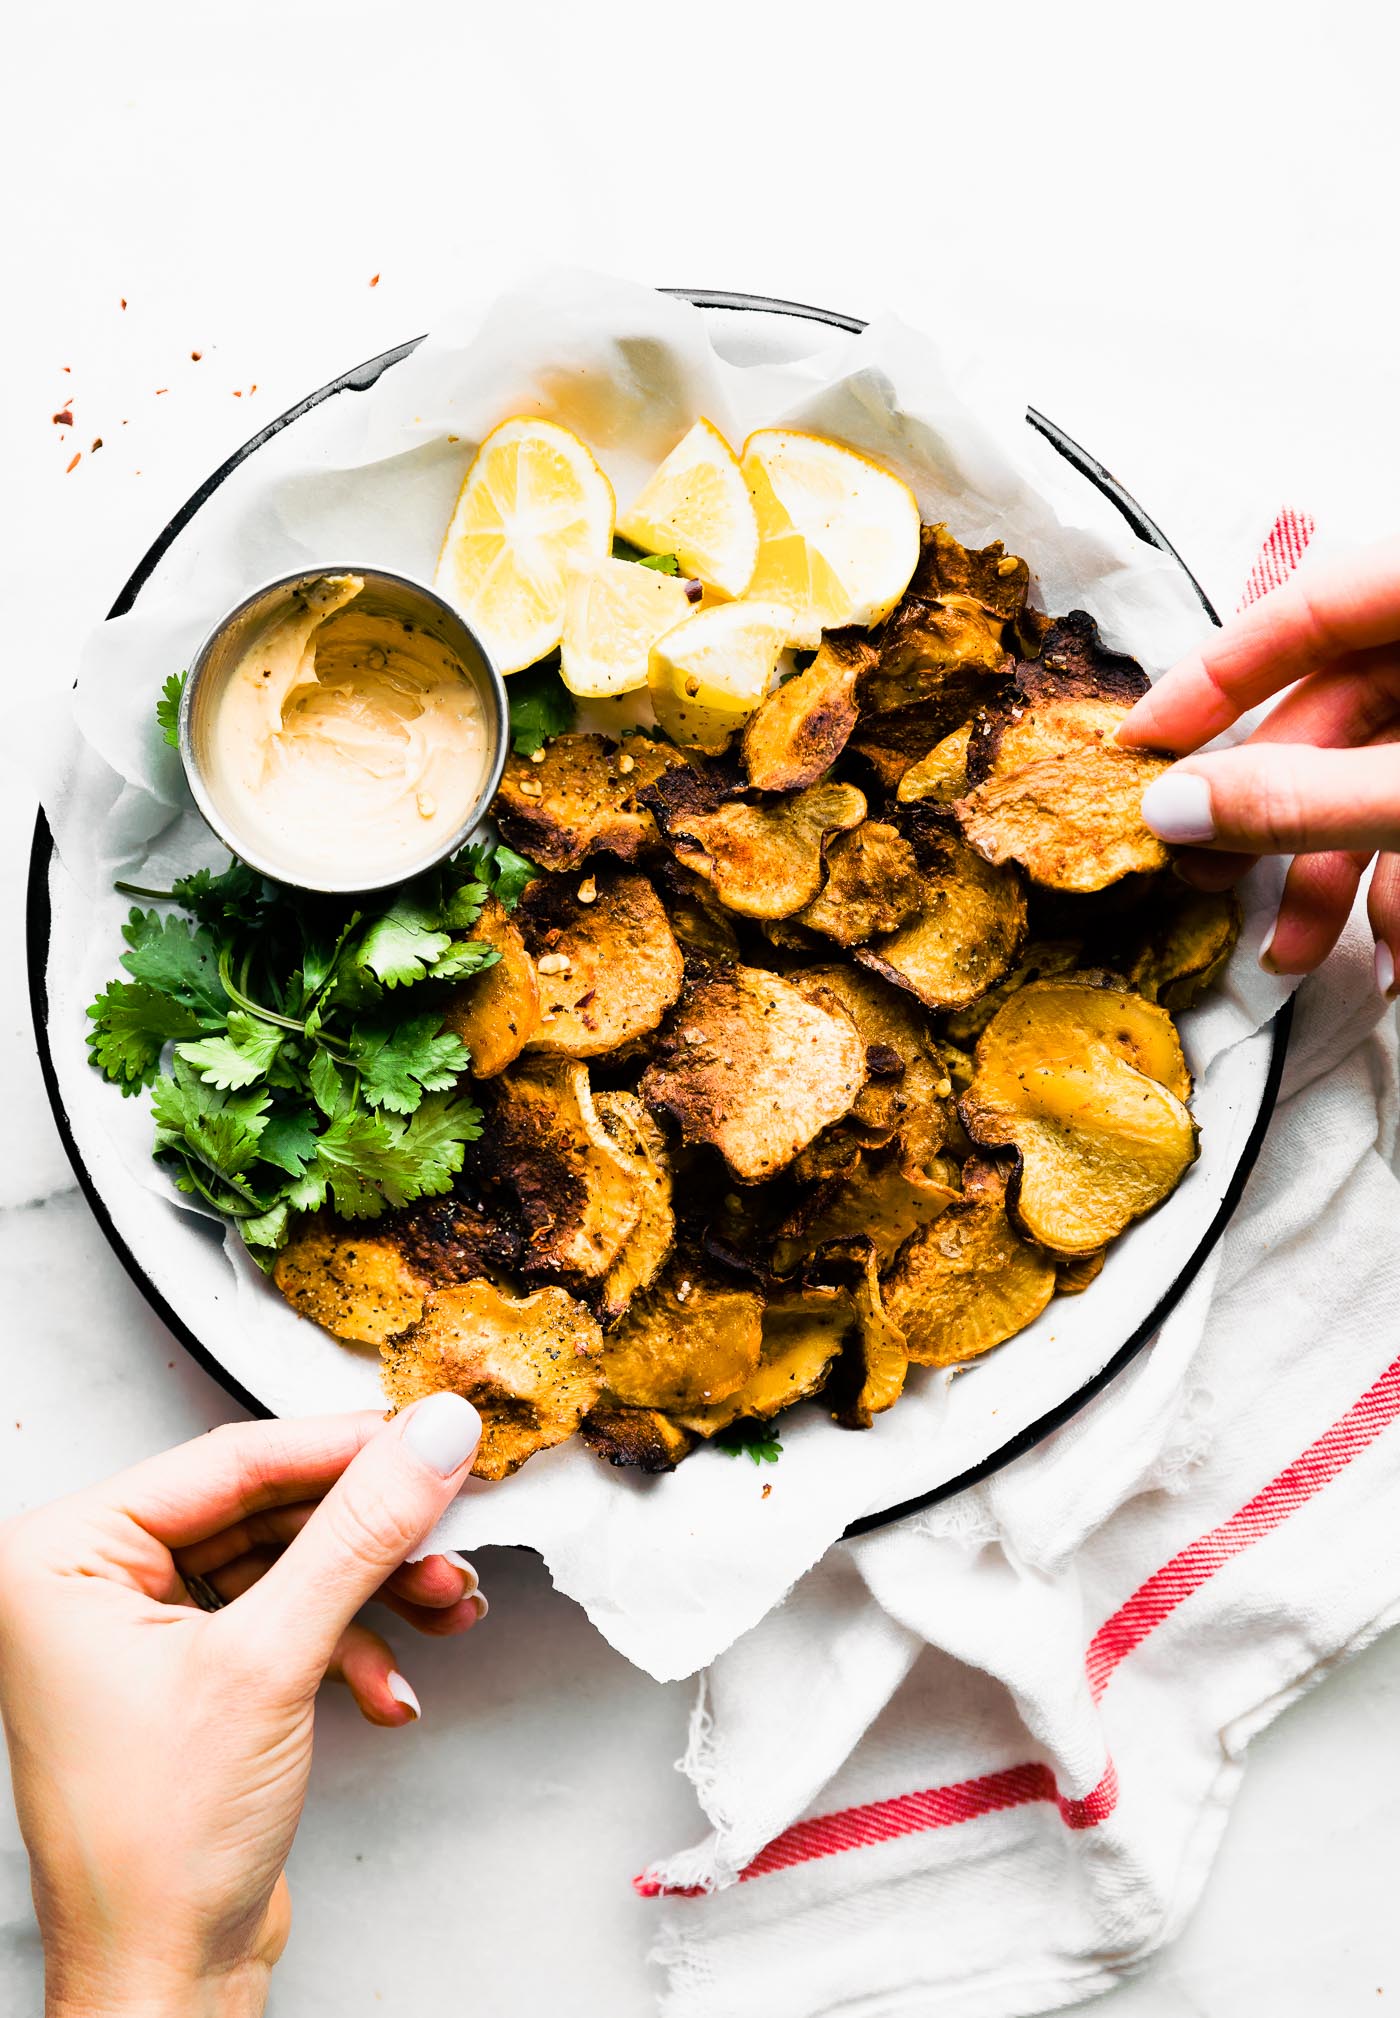 EASY BBQ Baked Rutabaga Chips! Healthy flavorful side dish for Summer BBQ's or any time of year! Rutabaga is a root vegetable that's easy to bake and cook with! These chips are super tasty, kid friendly, and naturally #paleo #vegan! EAT UP!